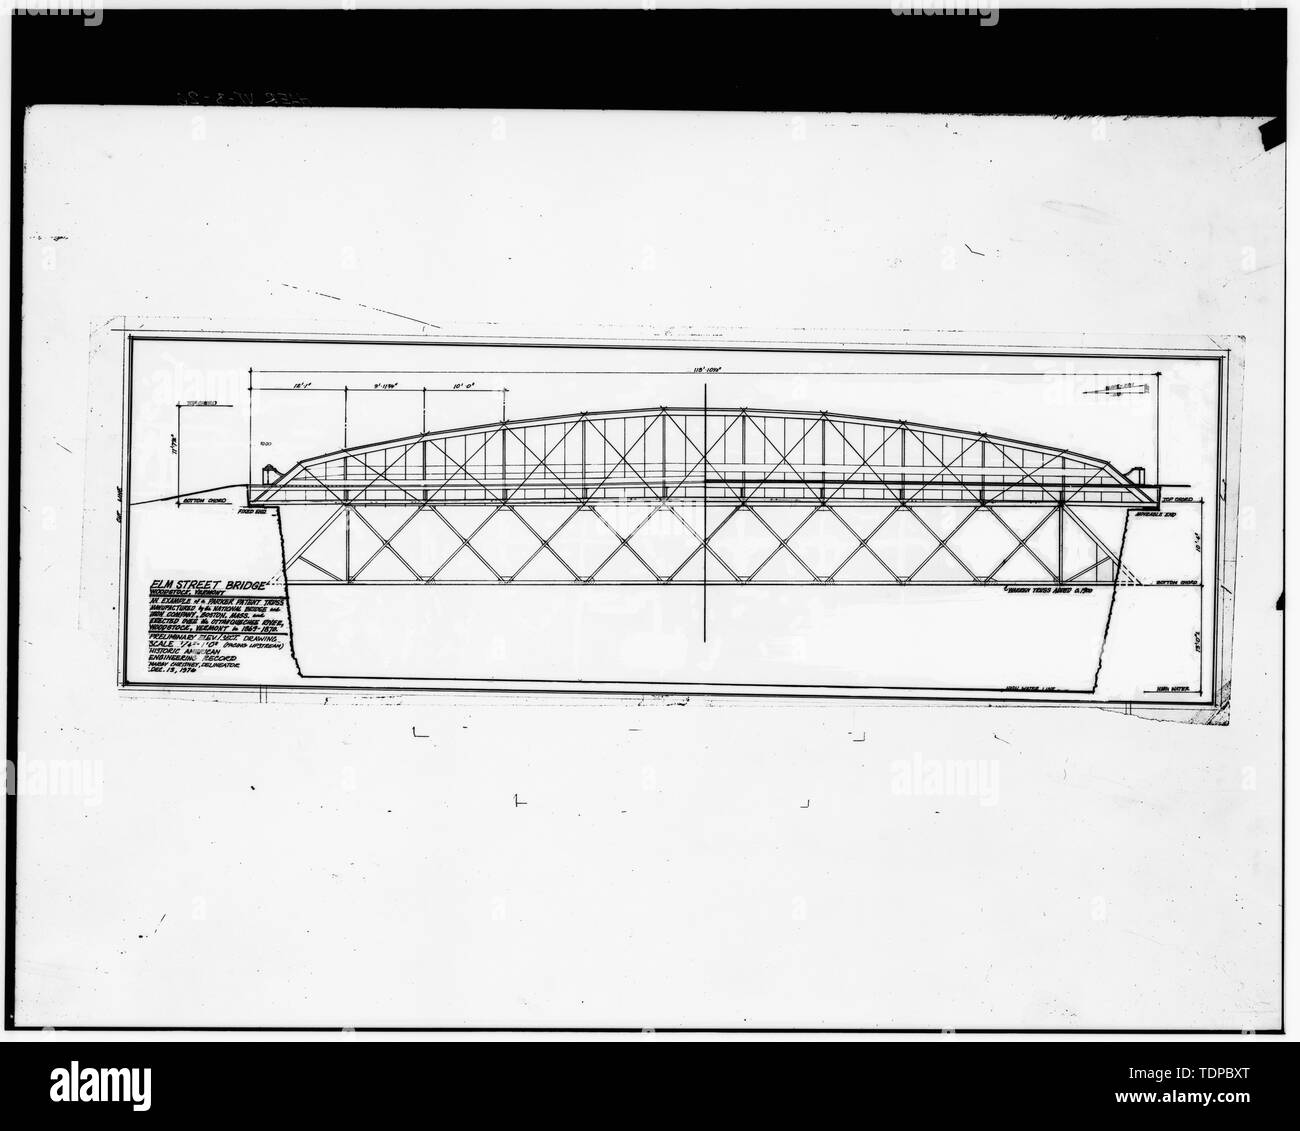 Photocopy of drawing (original prepared by Margy Chrisney, December 1976) PRELIMINARY ELVATION-SECTION DRAWING - Elm Street Bridge, Spanning Ottauquechee River, Woodstock, Windsor County, VT; National Bridge and Iron Company; Royalton and Woodstock Turnpike Company; Raymond, William; Raymond, Barna; Marsh, Charles P; Parker, Charles H; Parker, A W; Blodgett, William A; Curry, Cadwallader; Clement, Dan, transmitter; Christianson, Justine, transmitter Stock Photo